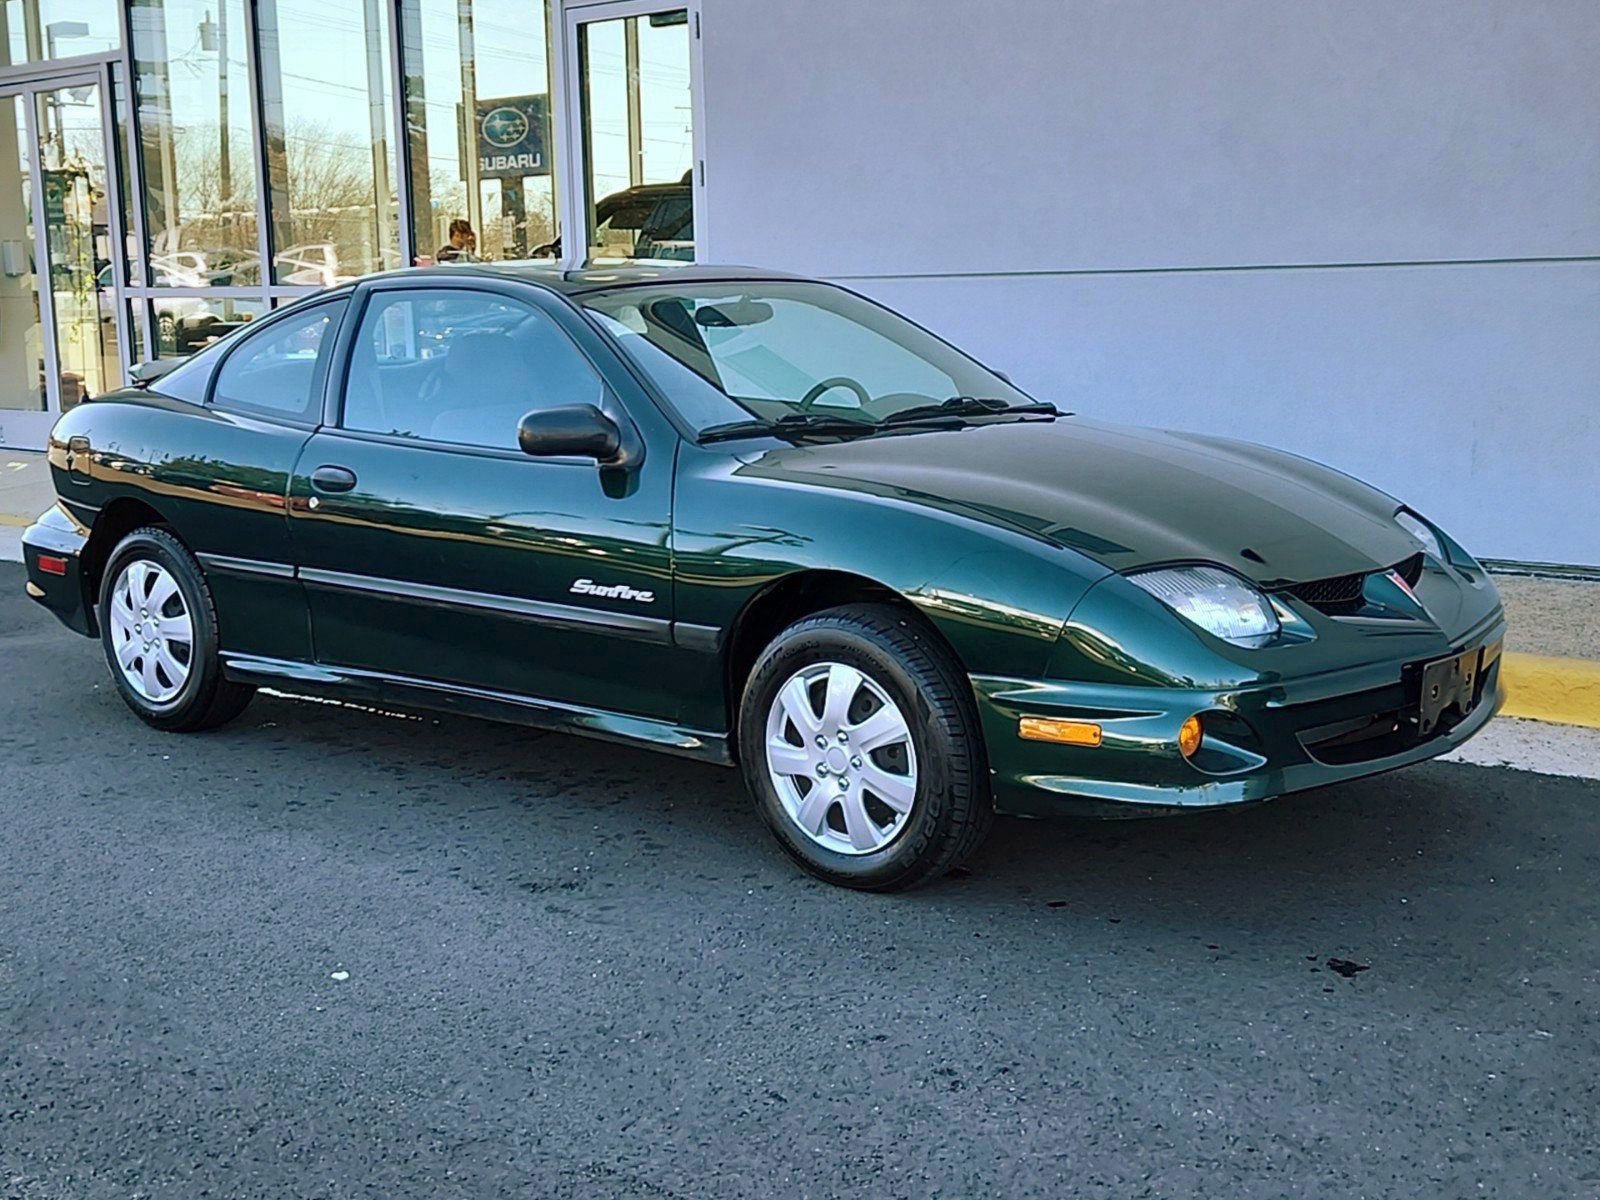 Used 2002 Pontiac Sunfire Coupes for Sale Right Now - Autotrader